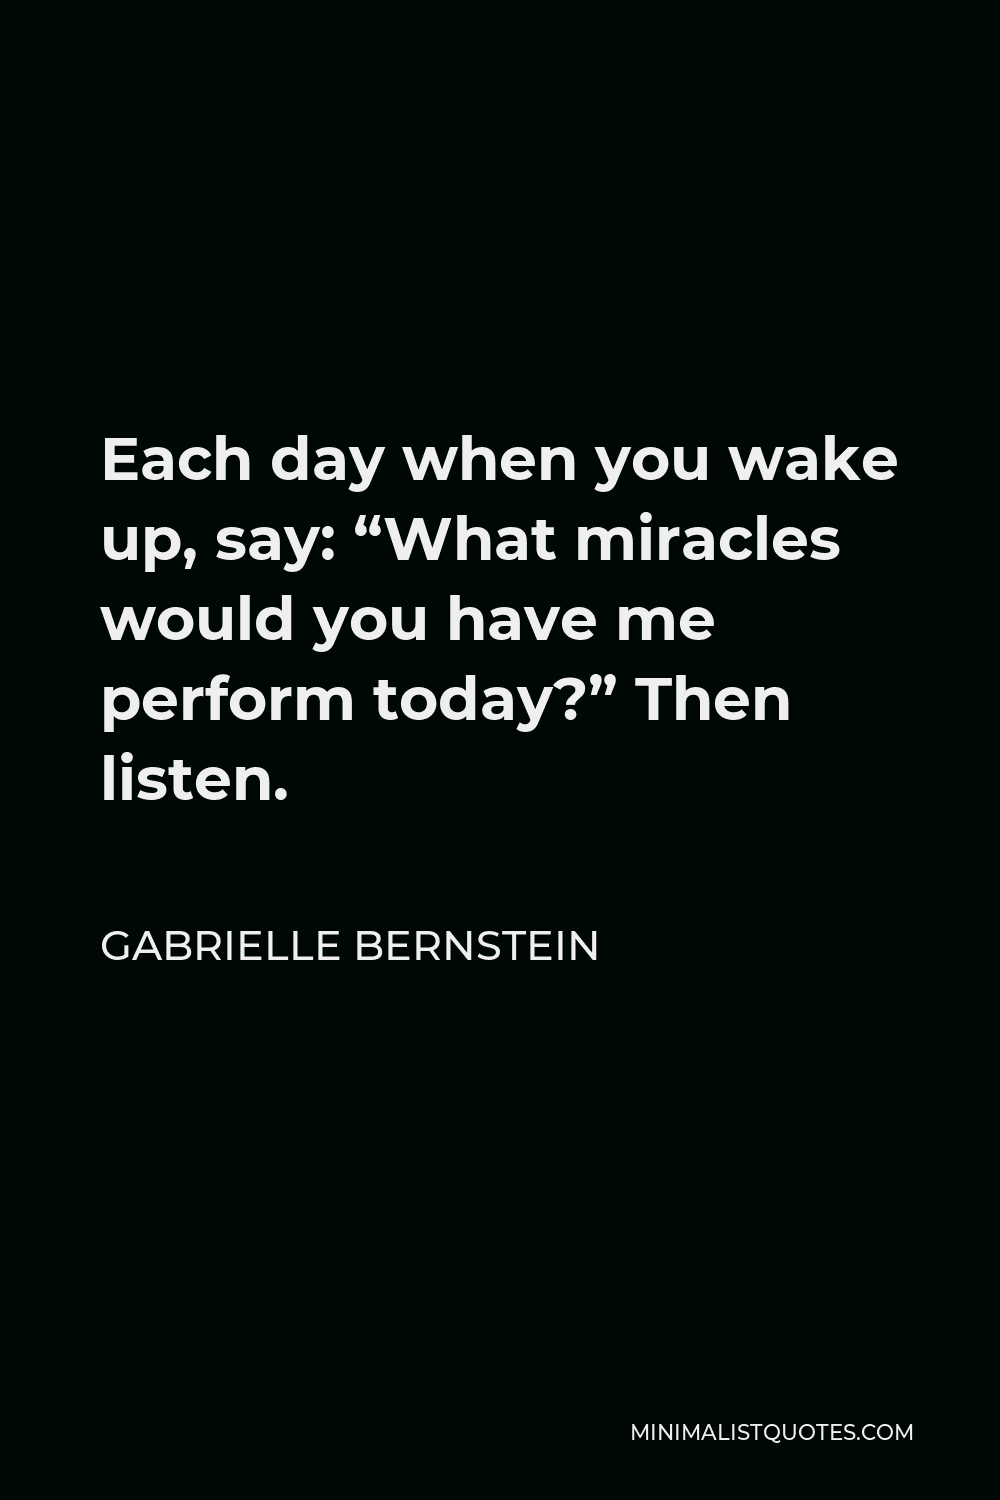 Gabrielle Bernstein Quote - Each day when you wake up, say: “What miracles would you have me perform today?” Then listen.